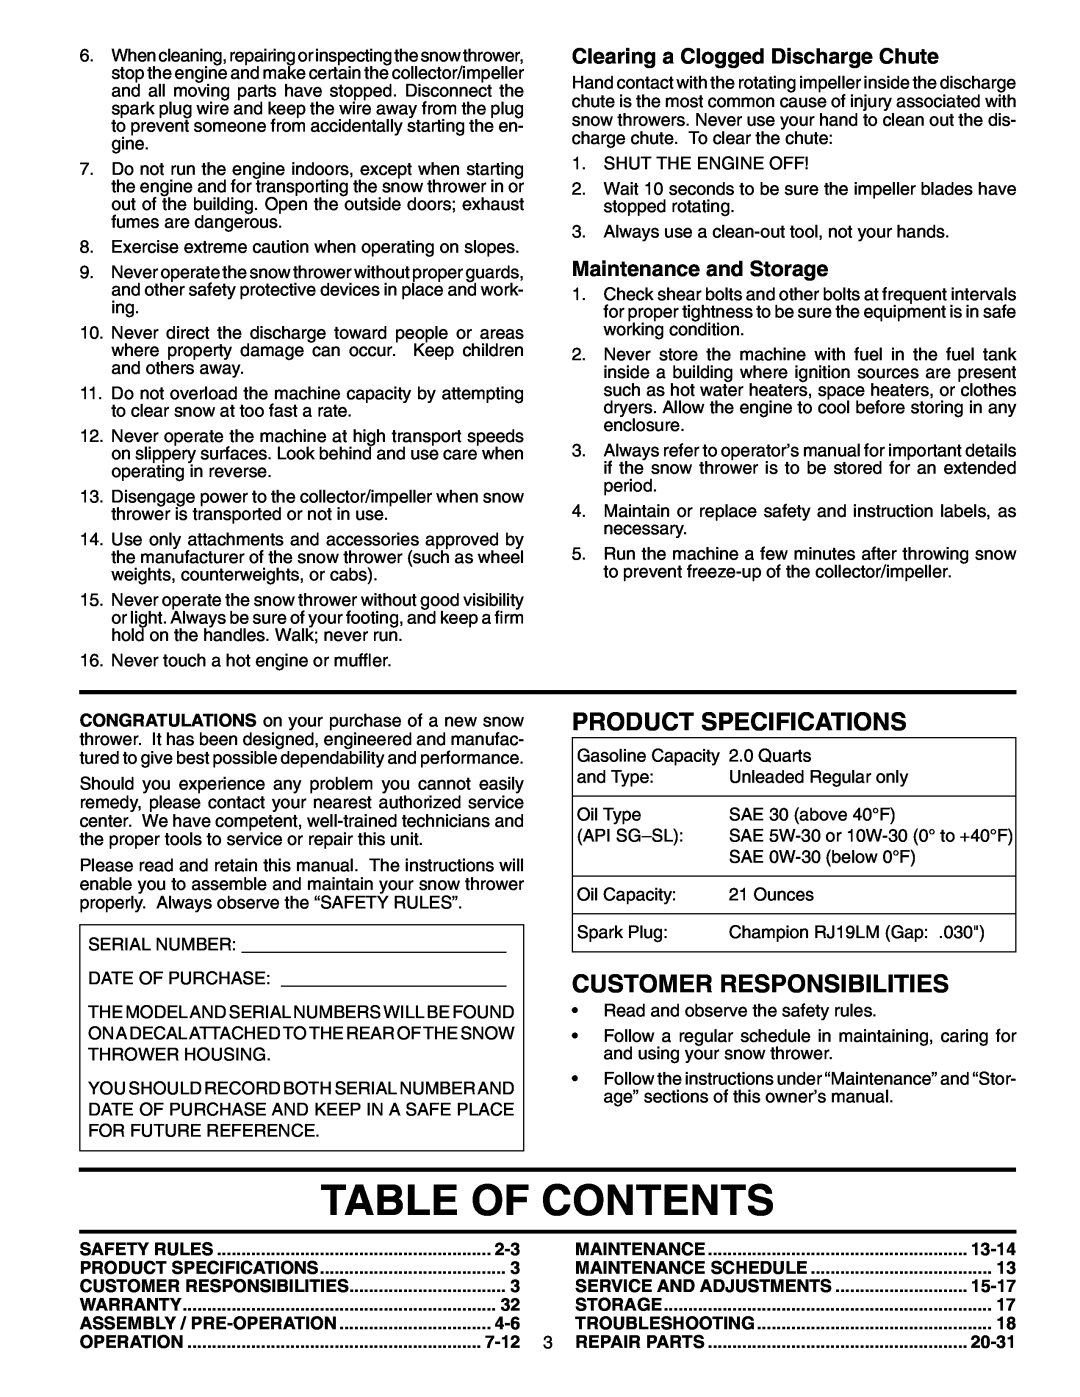 Husqvarna 524S Table Of Contents, Product Specifications, Customer Responsibilities, Clearing a Clogged Discharge Chute 